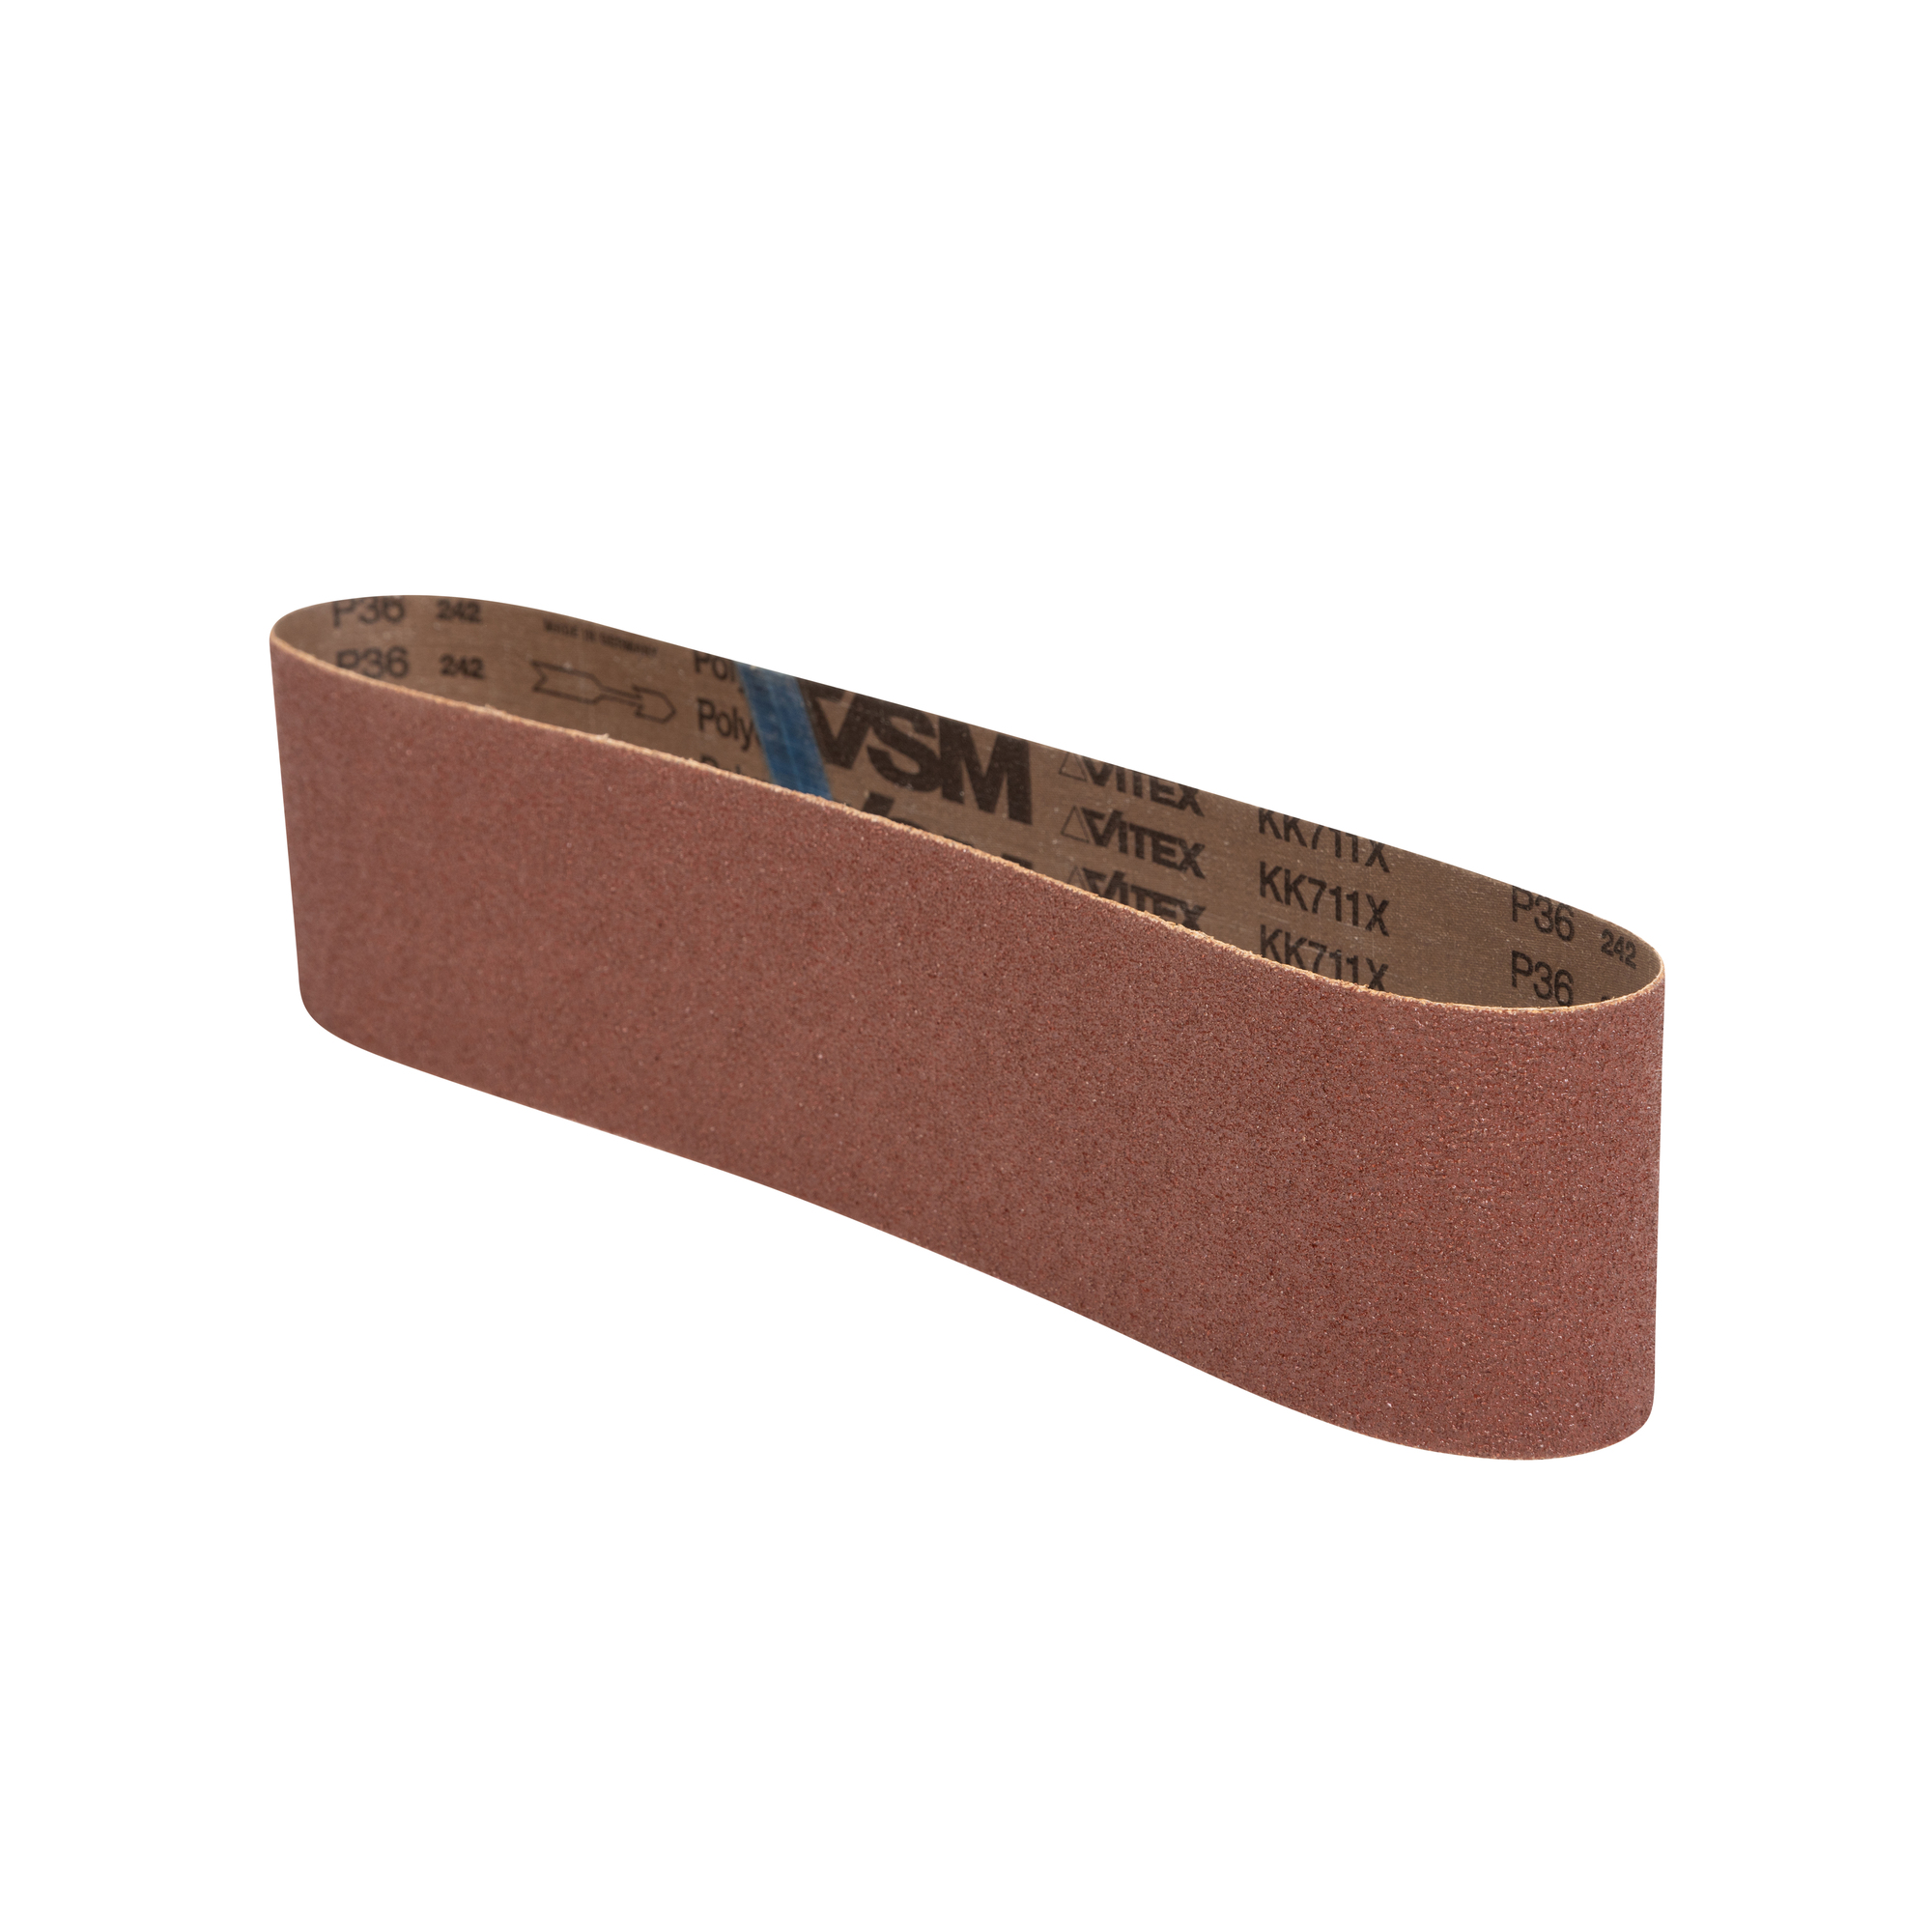 JET, Sand Paper, Pieces (qty.) 3 Grit 180 Length 36 in, Model 577535